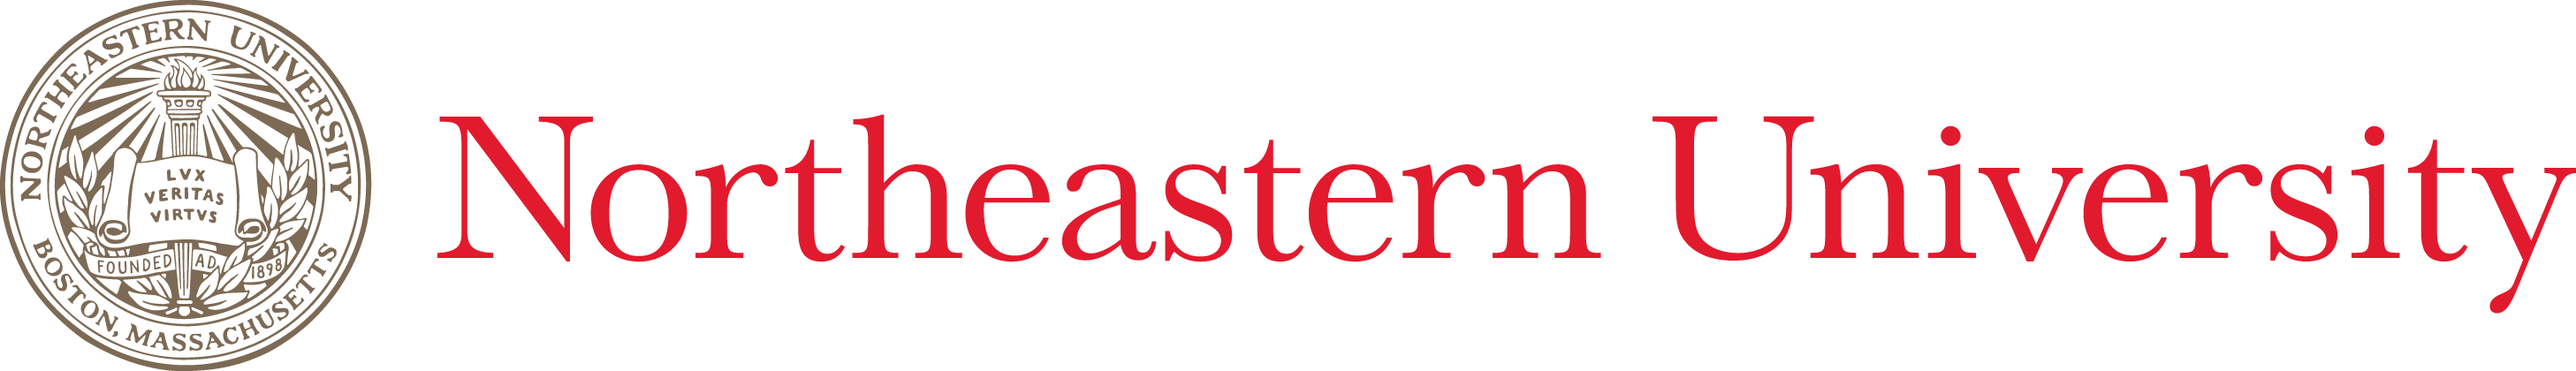 Master Of Business Administration - Northeastern University (2915x420)